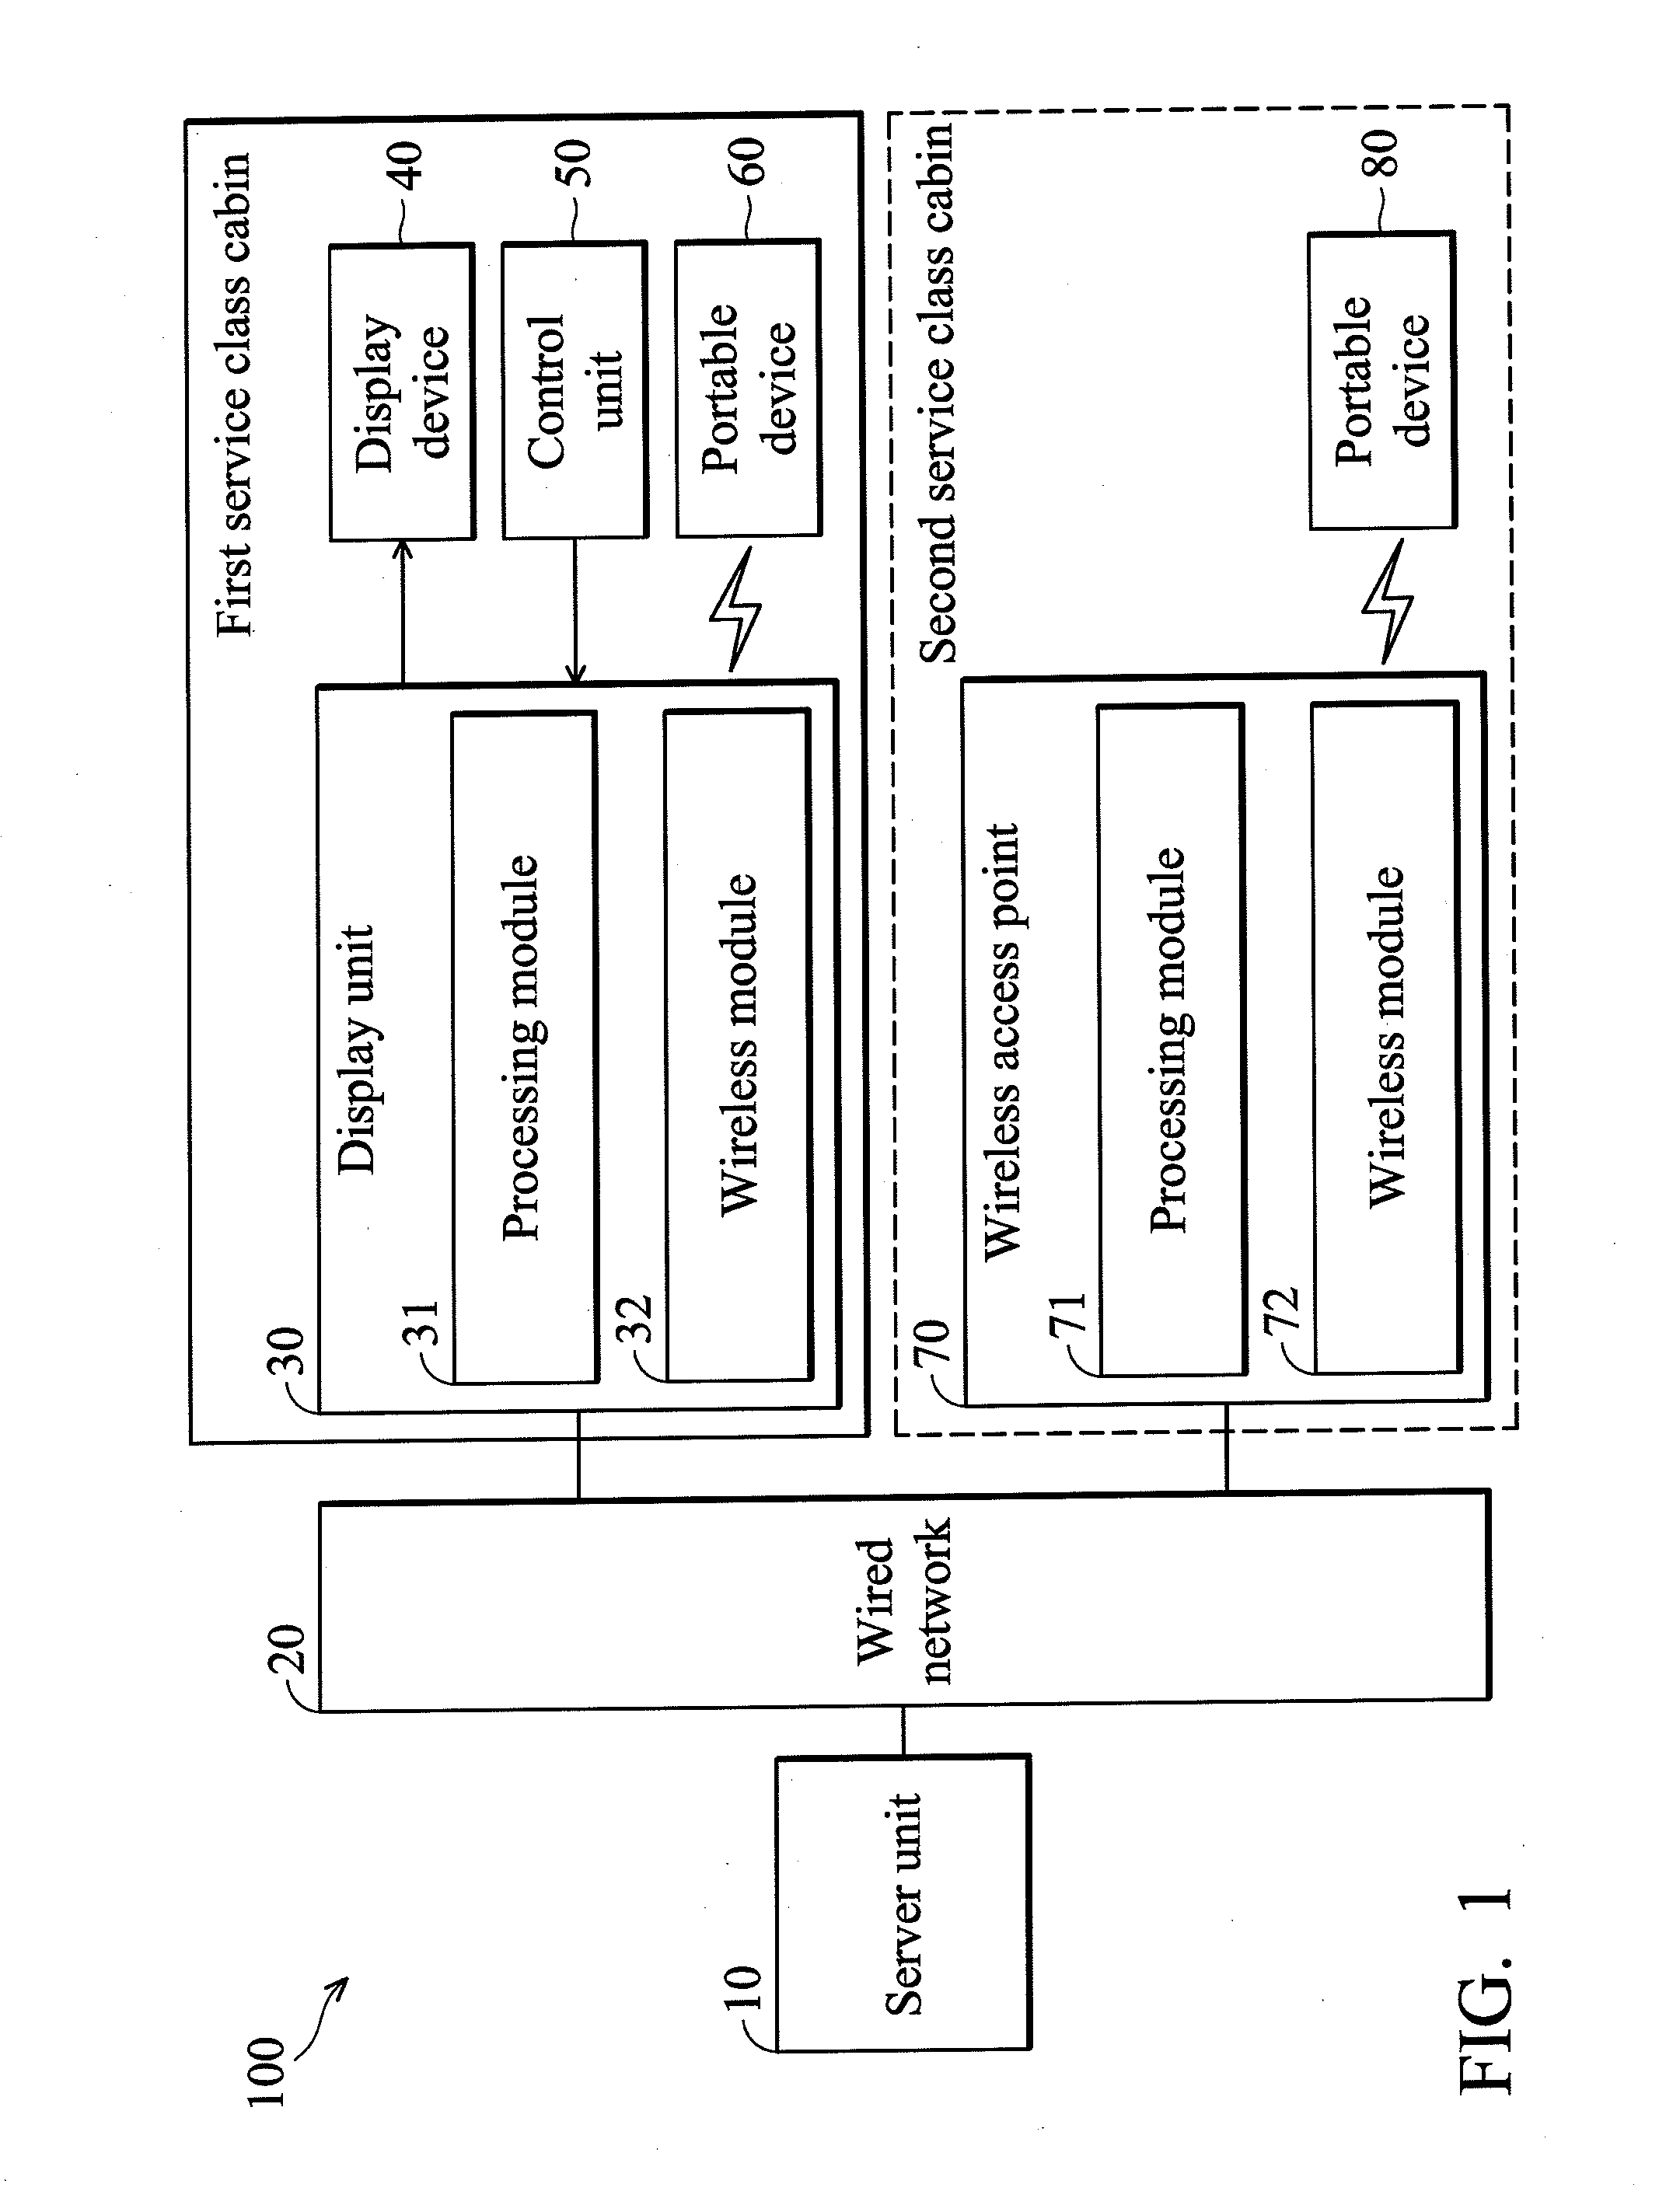 In-flight entertainment systems and methods for providing digital content in an aerial vehicle